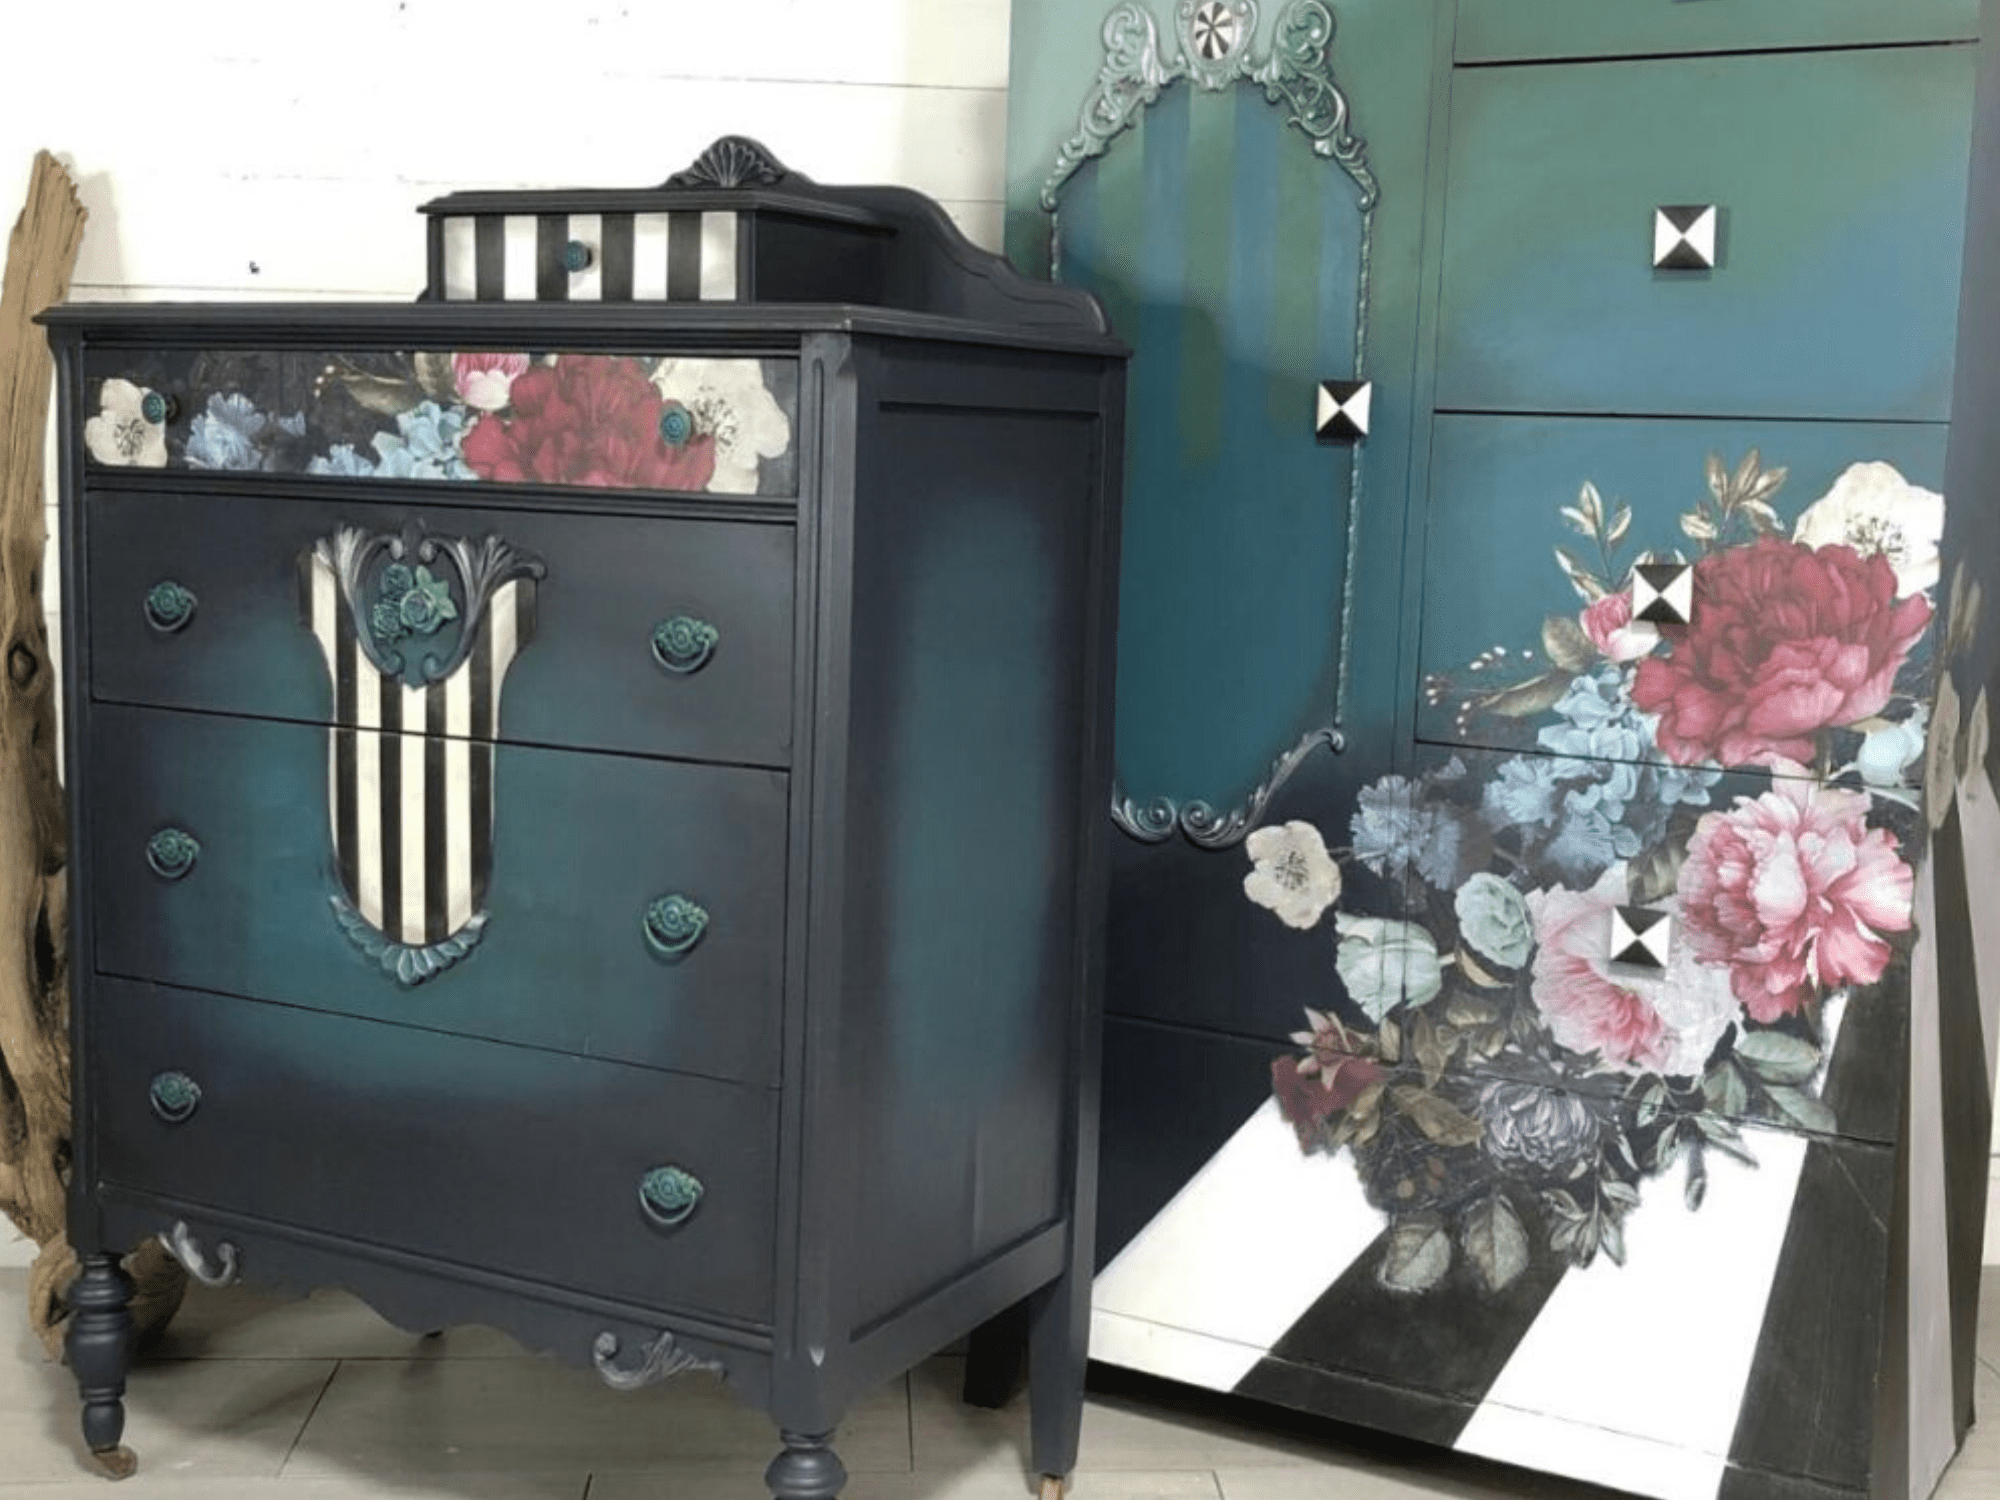 How to Paint Pop Art Furniture